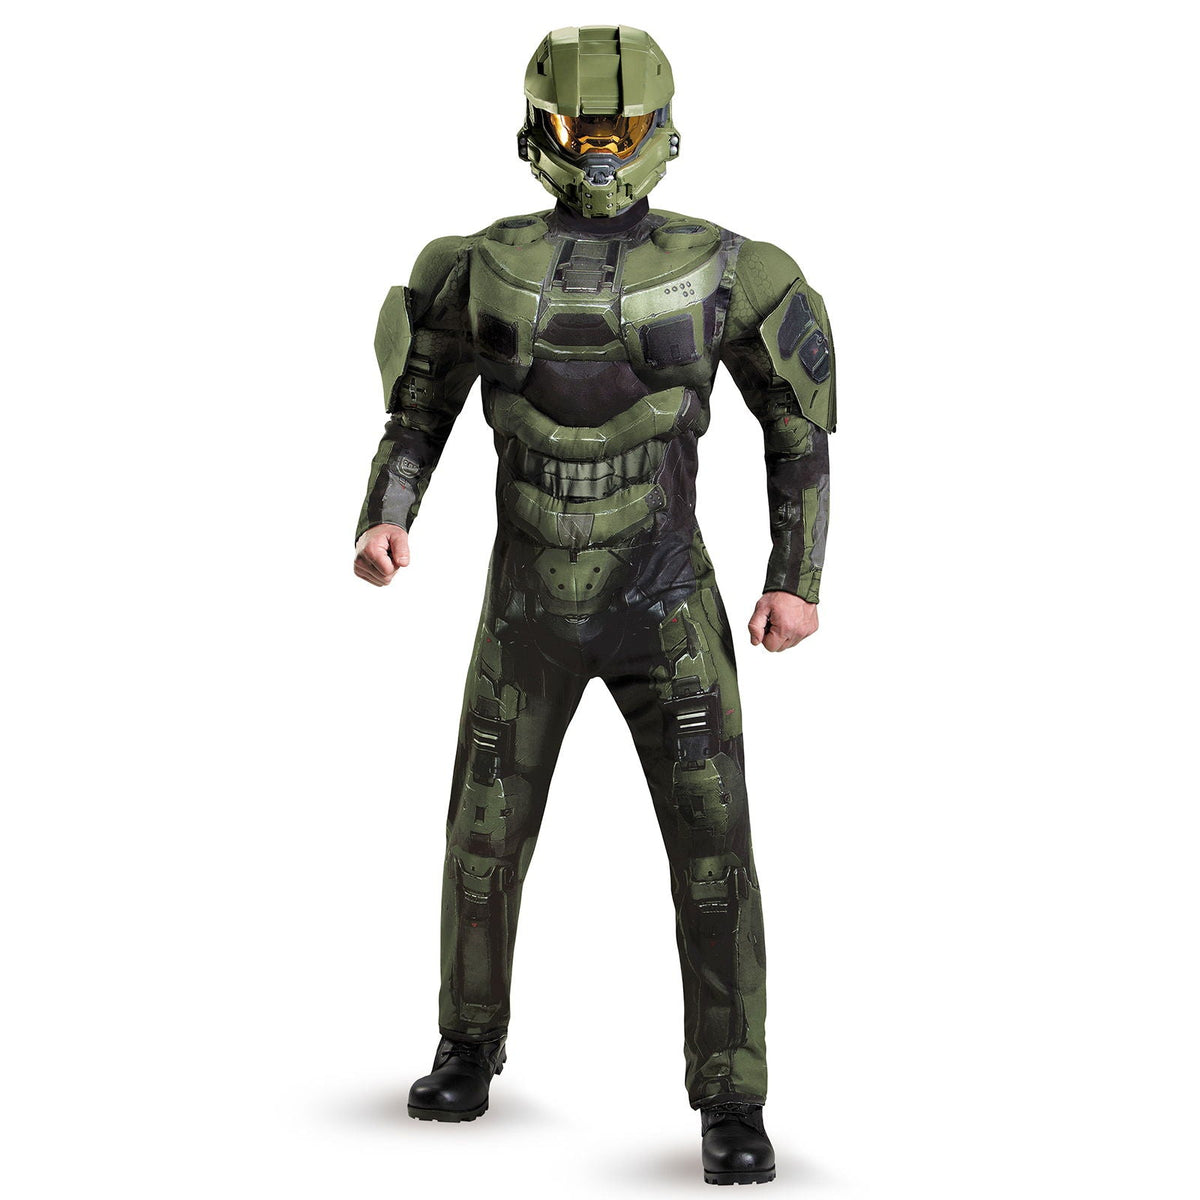 DISGUISE (TOY-SPORT) Costumes Halo Master Chief Premium Costume for Adults,Jumpsuit with  Full Helmet